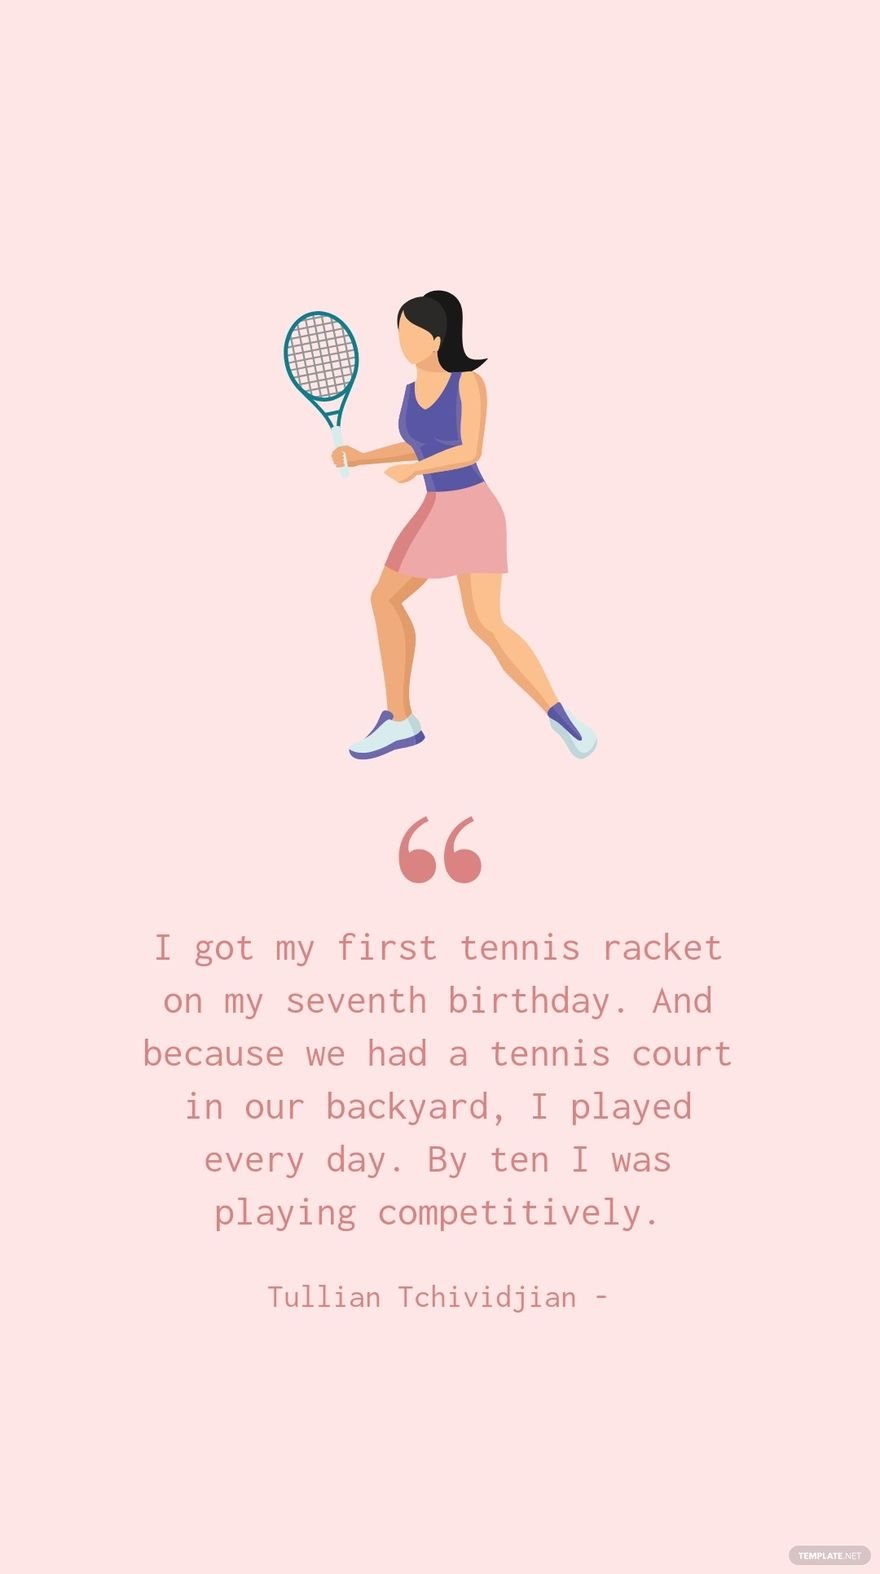 Tullian Tchividjian - I got my first tennis racket on my seventh birthday. And because we had a tennis court in our backyard, I played every day. By ten I was playing competitively.